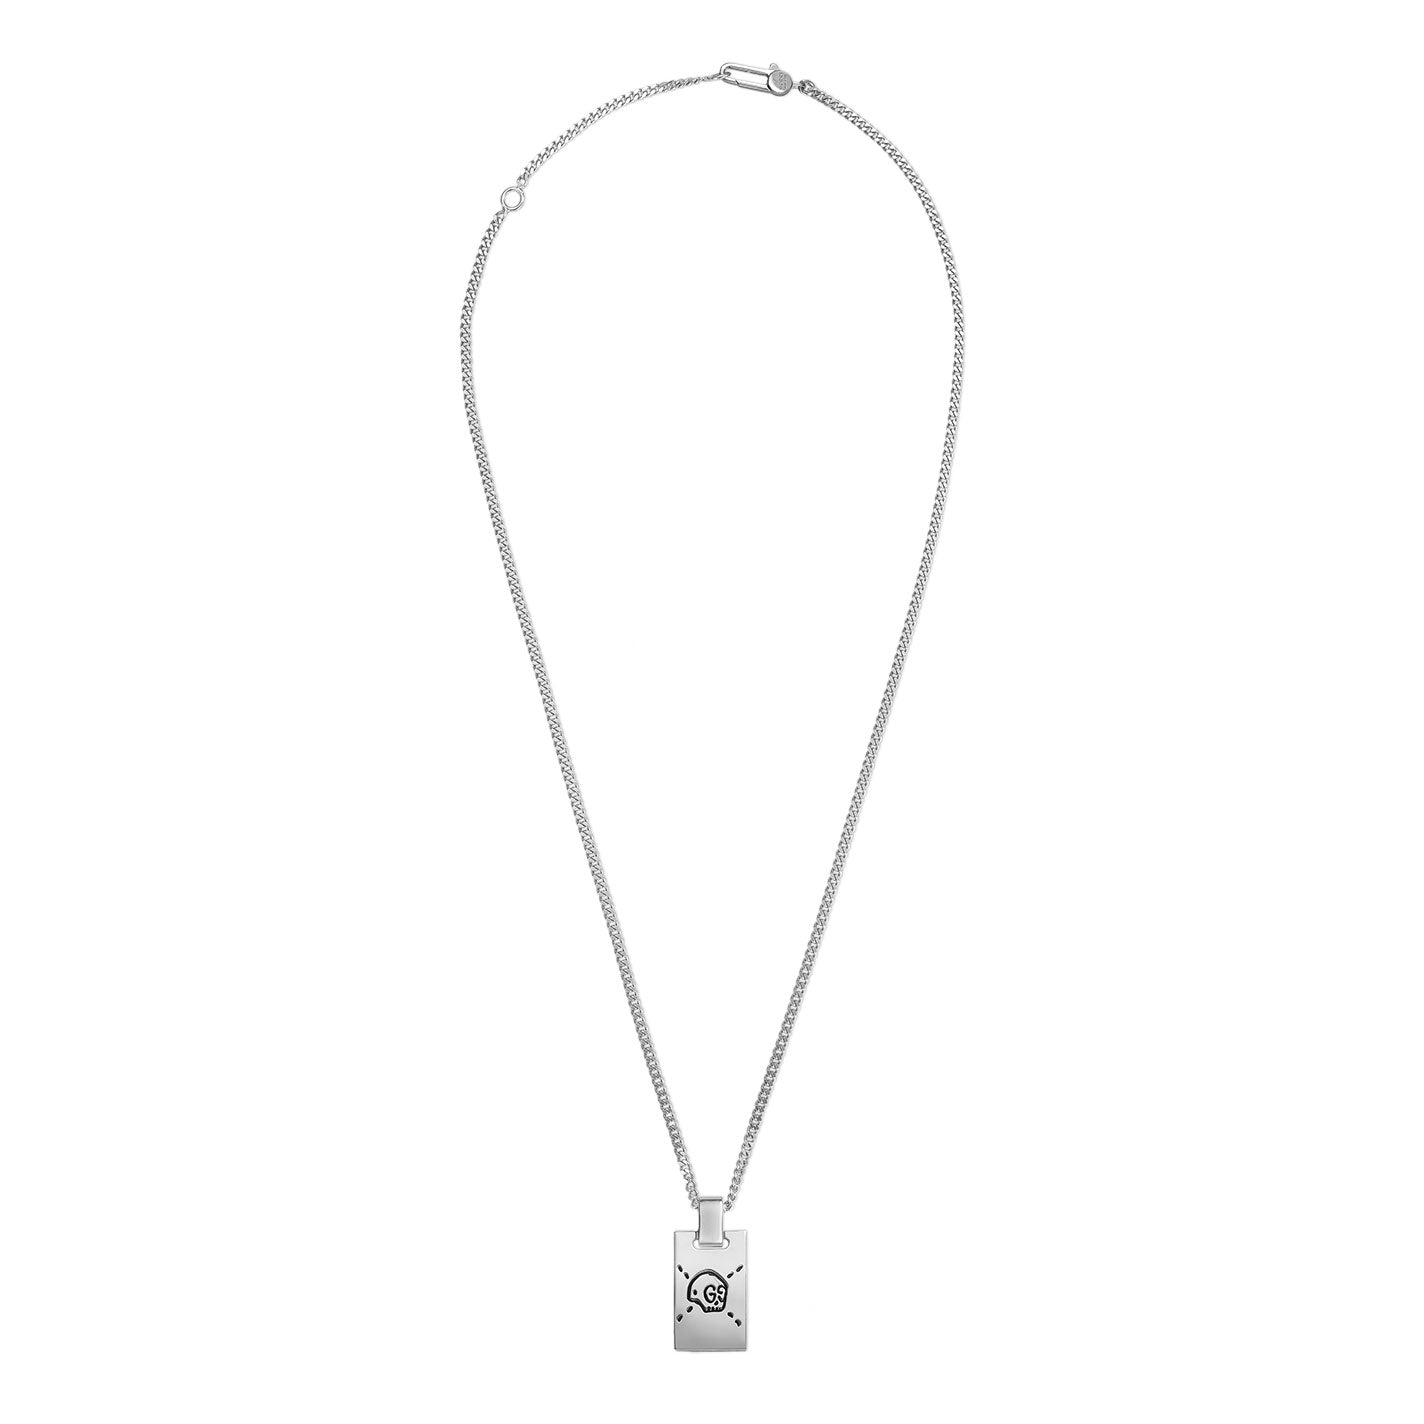 Gucci Ghost Sterling Silver Necklace Pendant